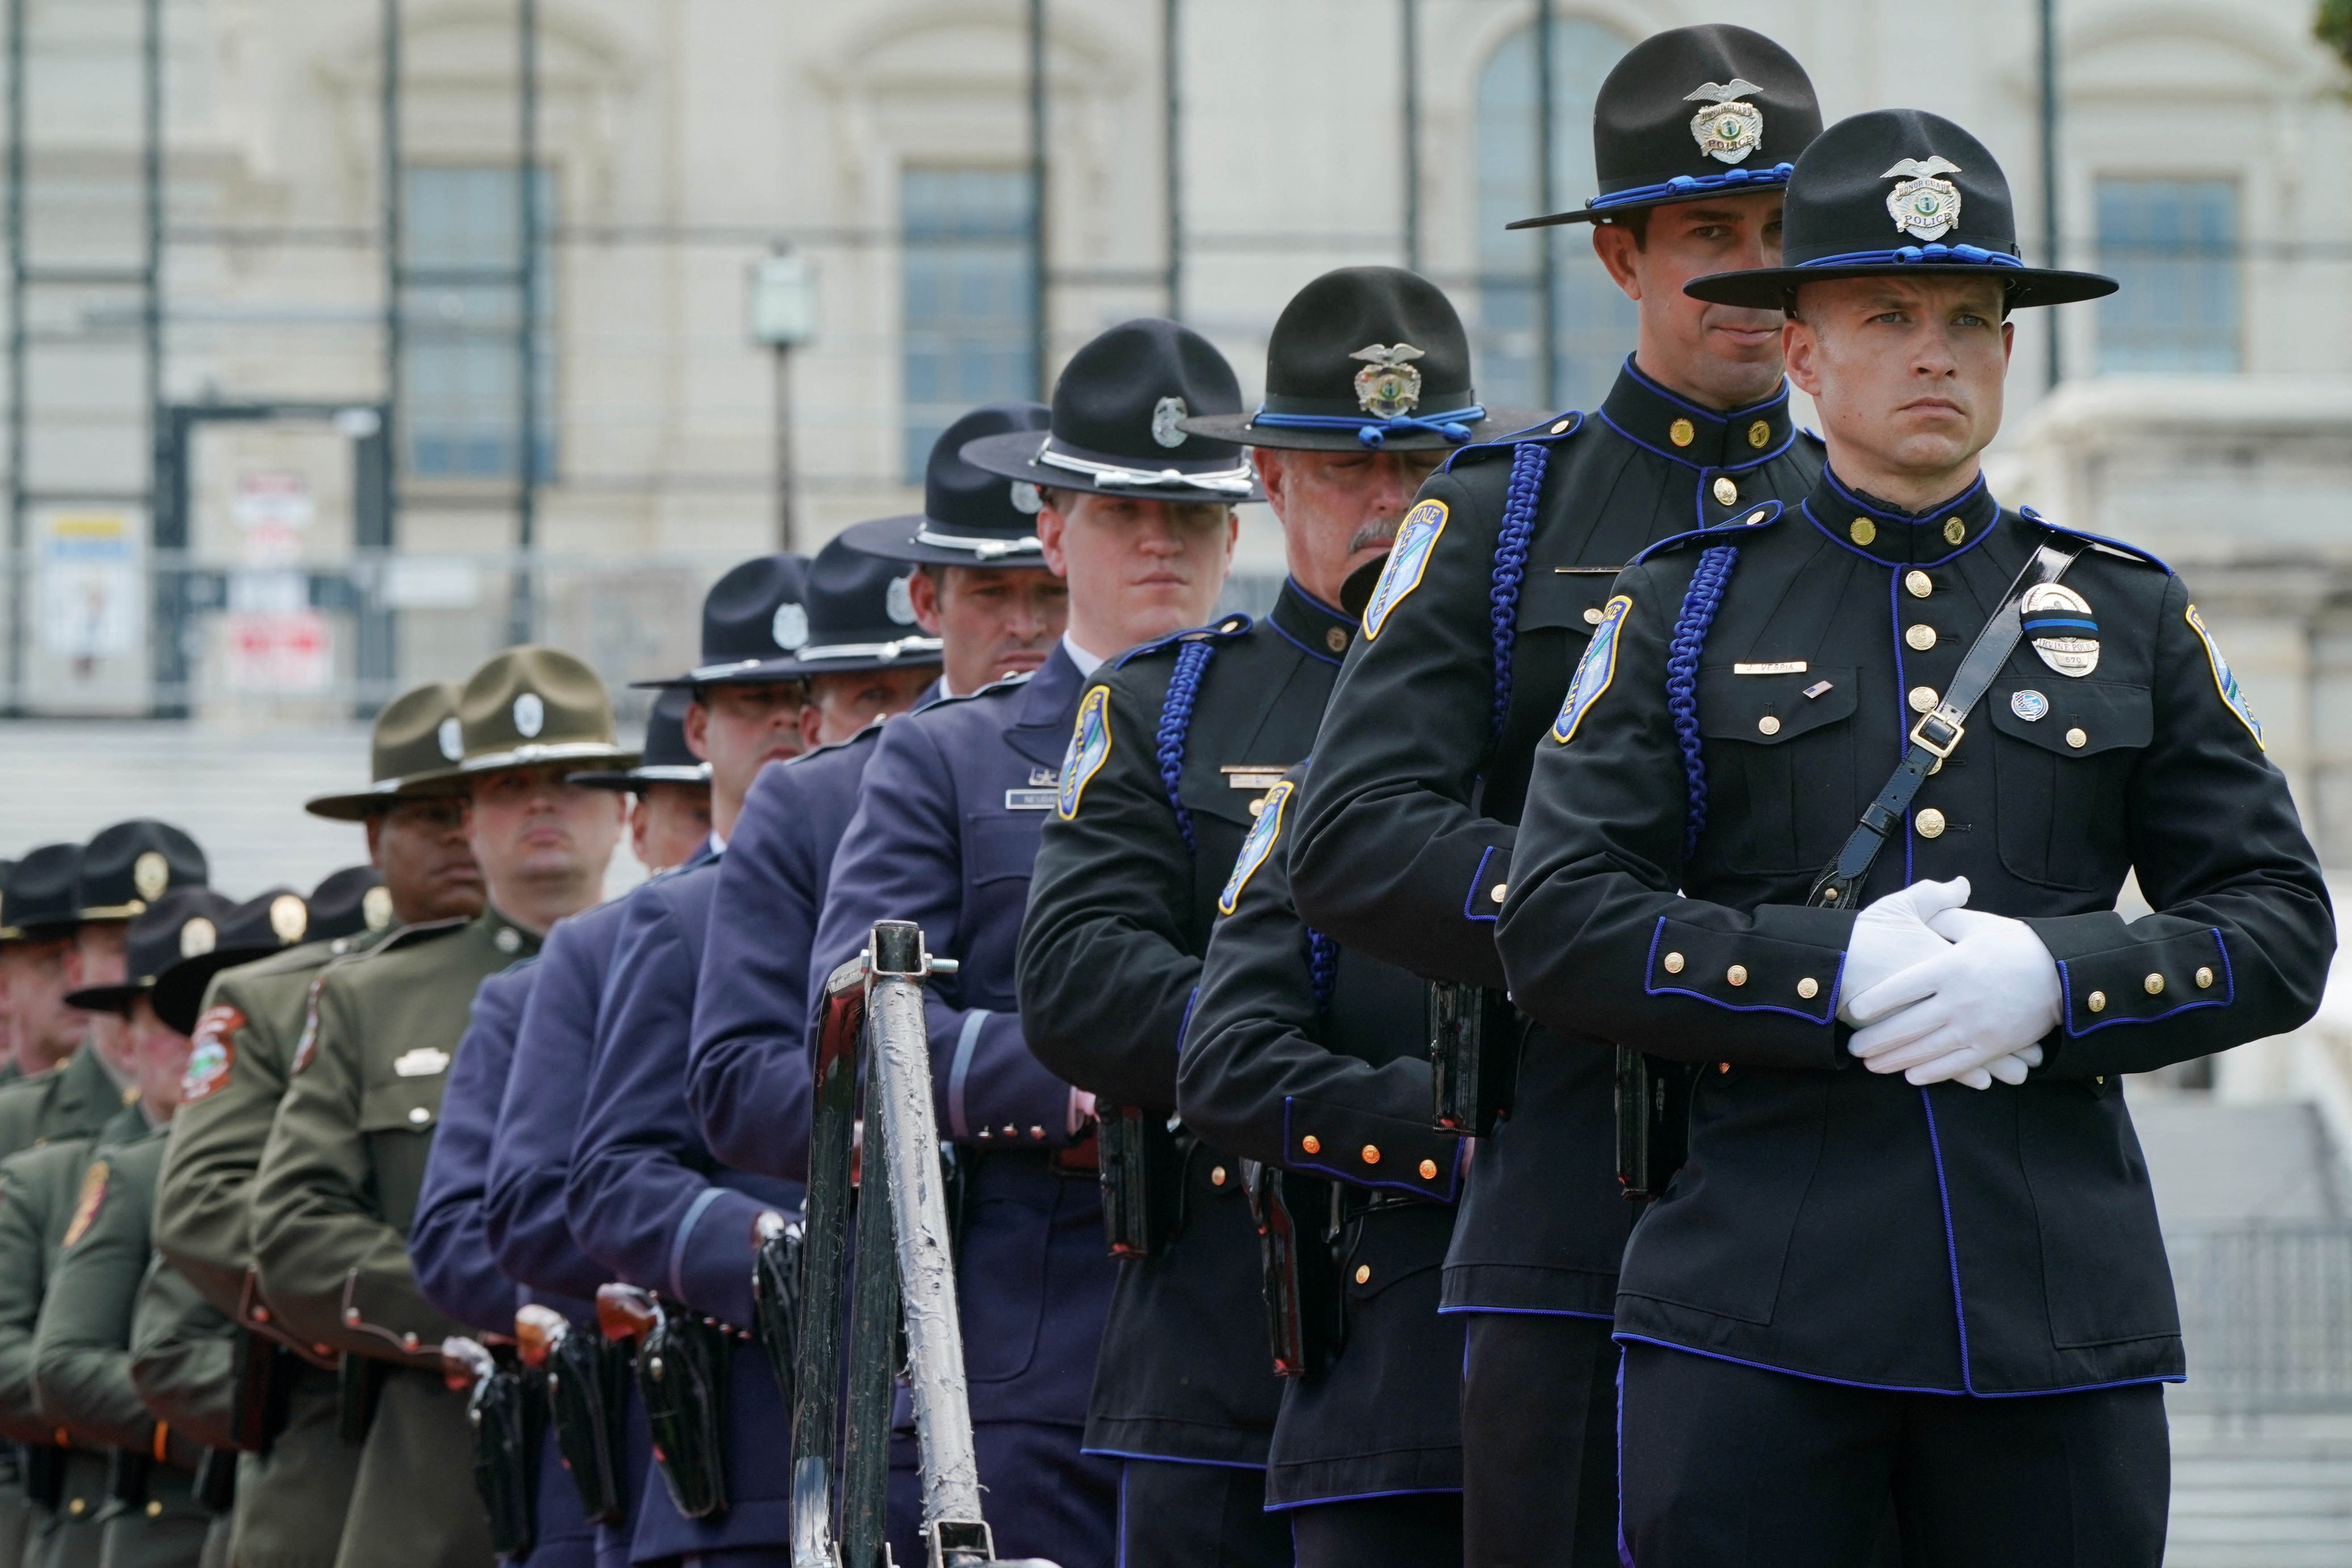 The annual National Peace Officers' Memorial Service at the U.S. Capitol in Washington